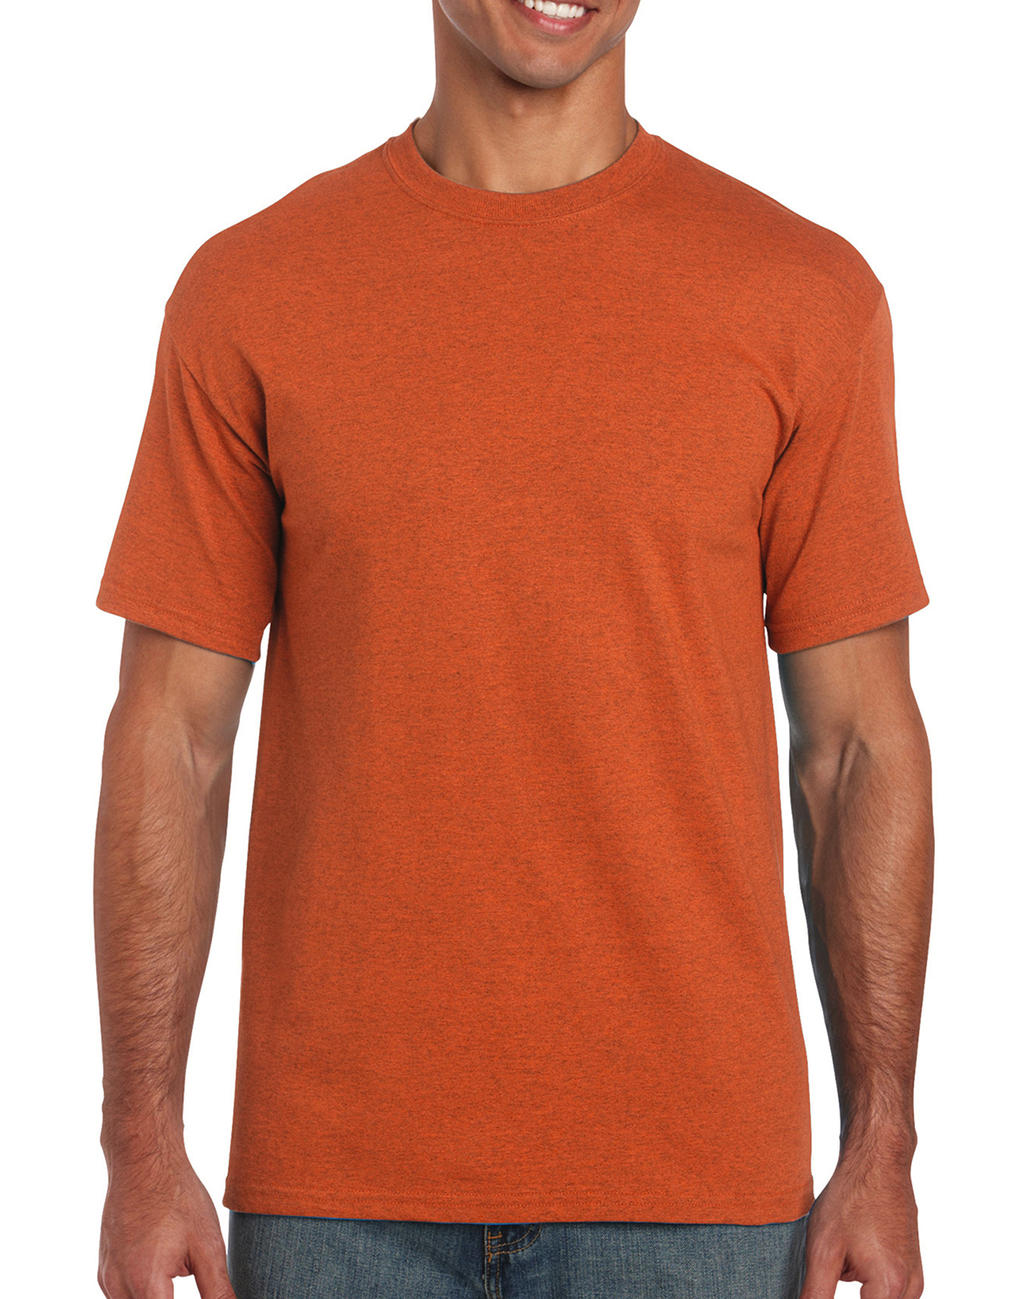  Heavy Cotton Adult T-Shirt in Farbe Antique Orange